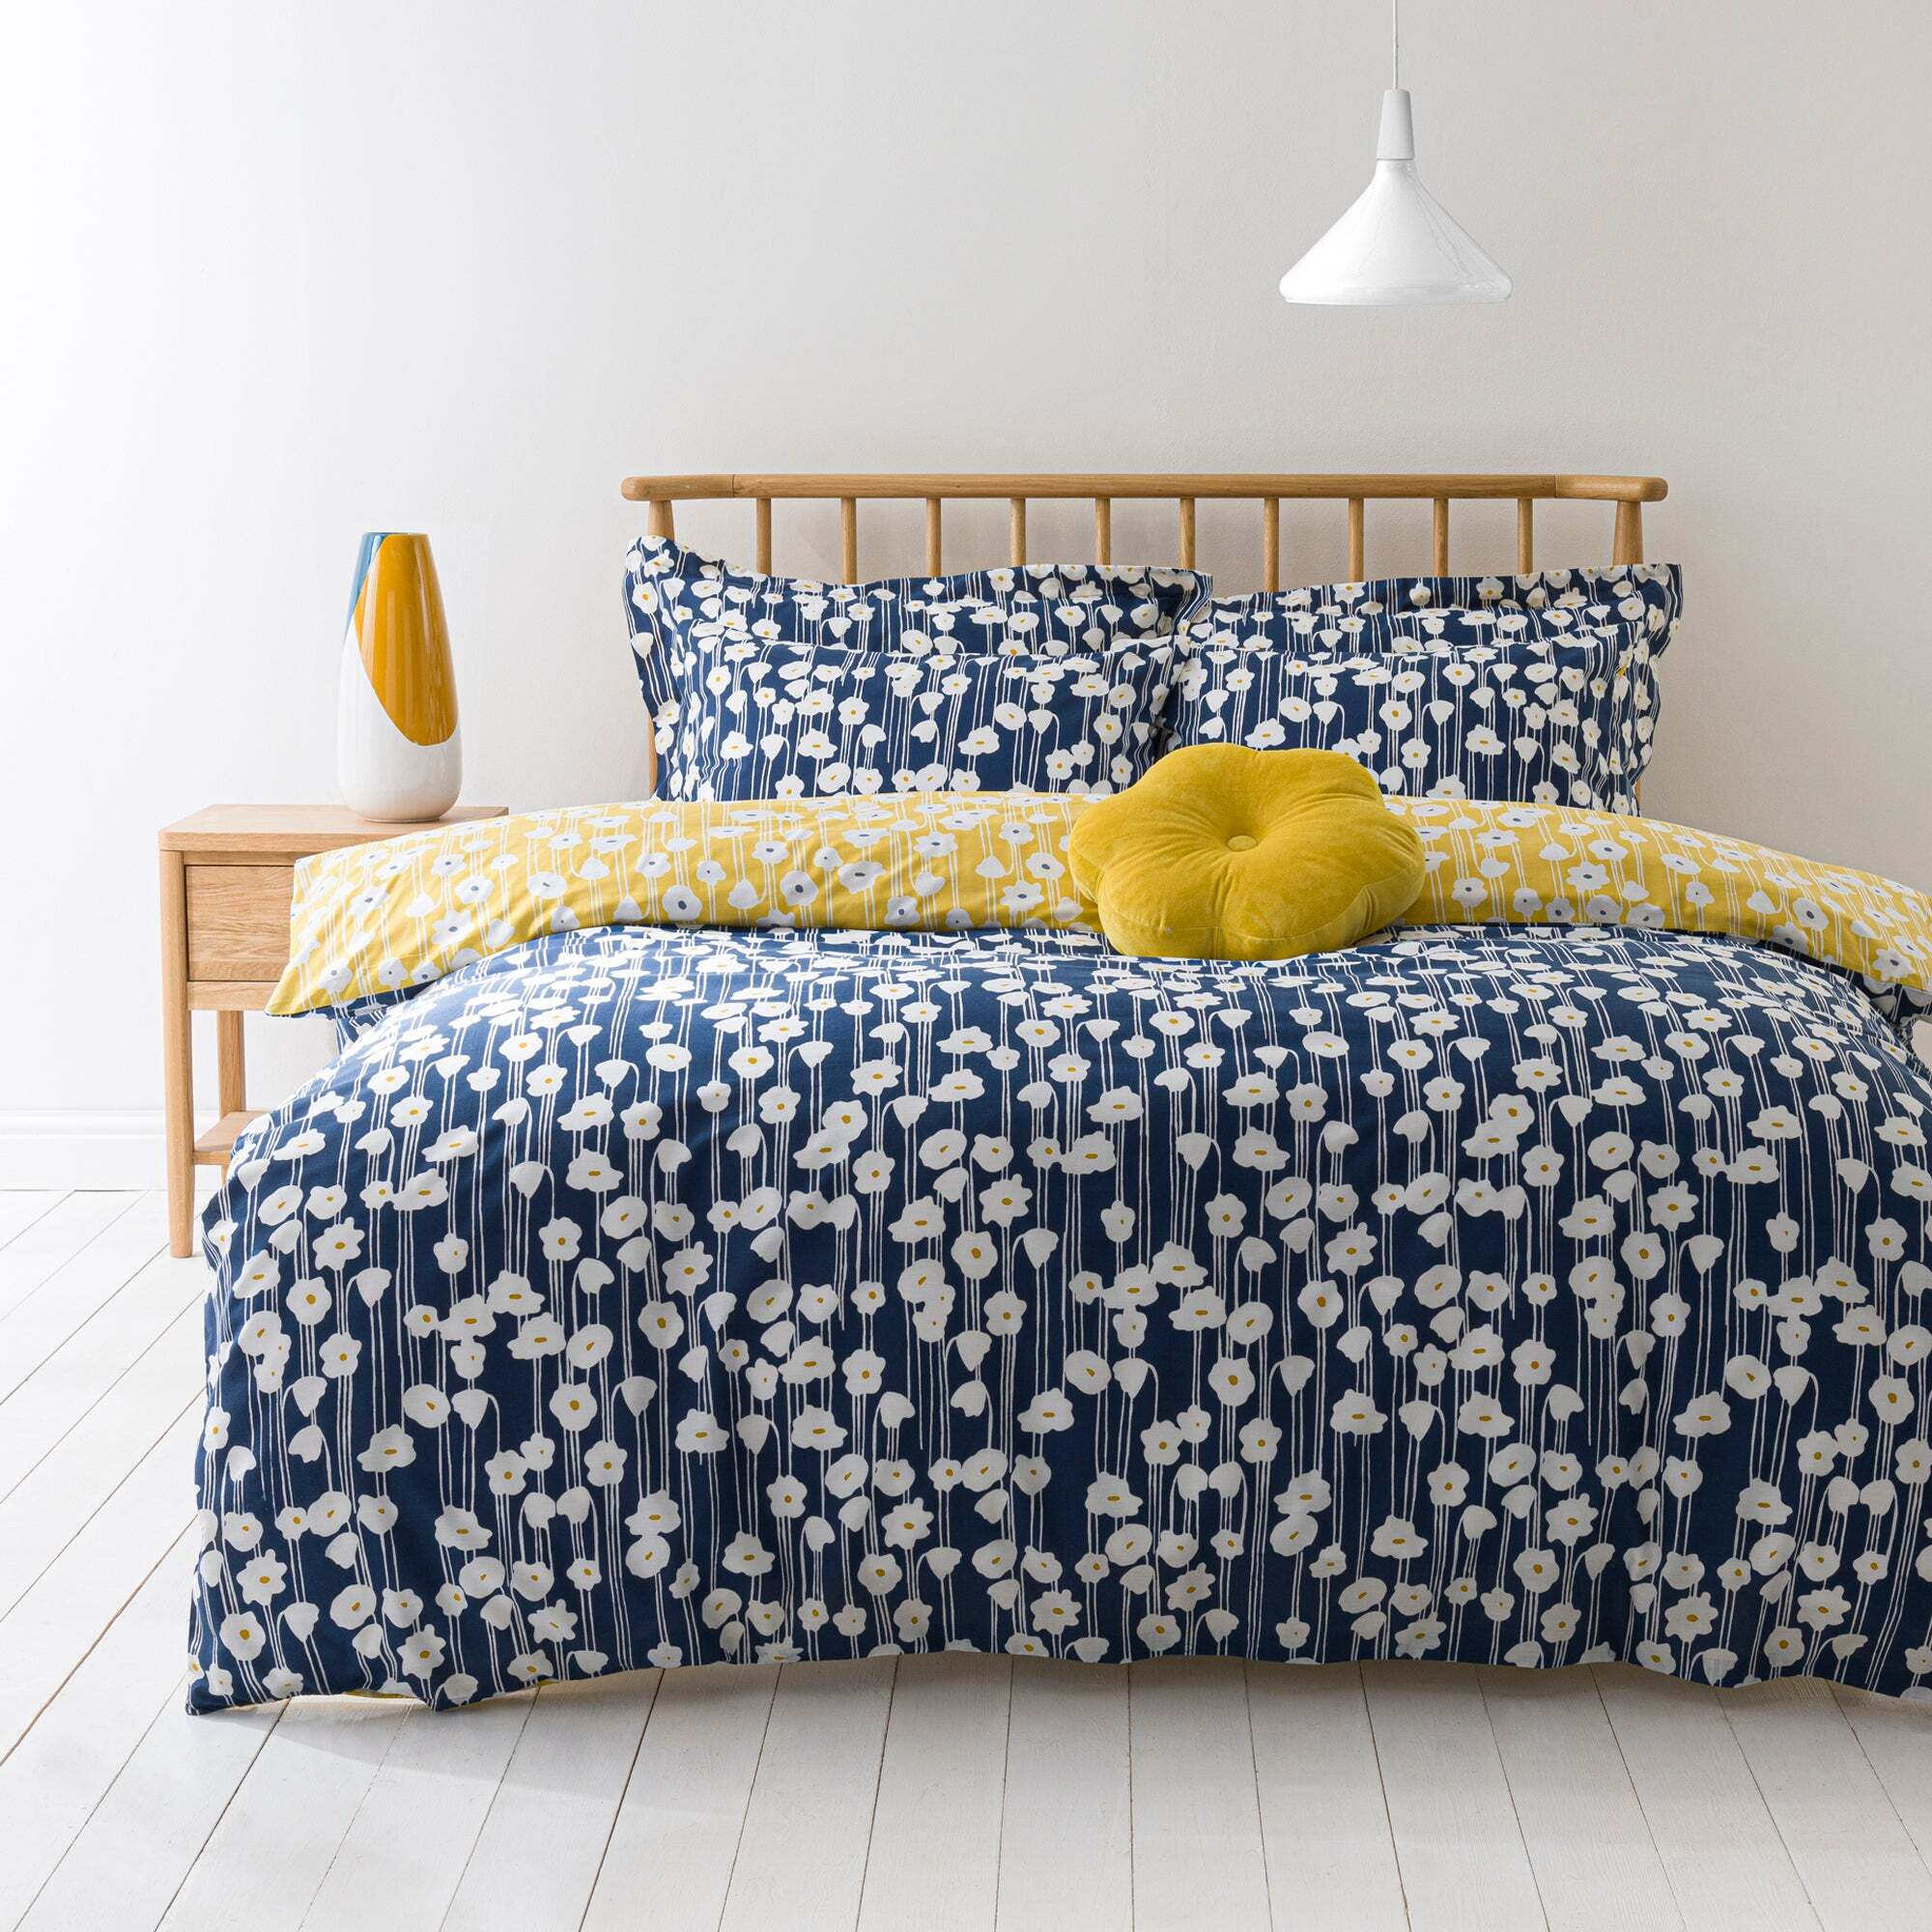 Elements Margo Navy Duvet Cover and Pillowcase Set Navy, White and Yellow